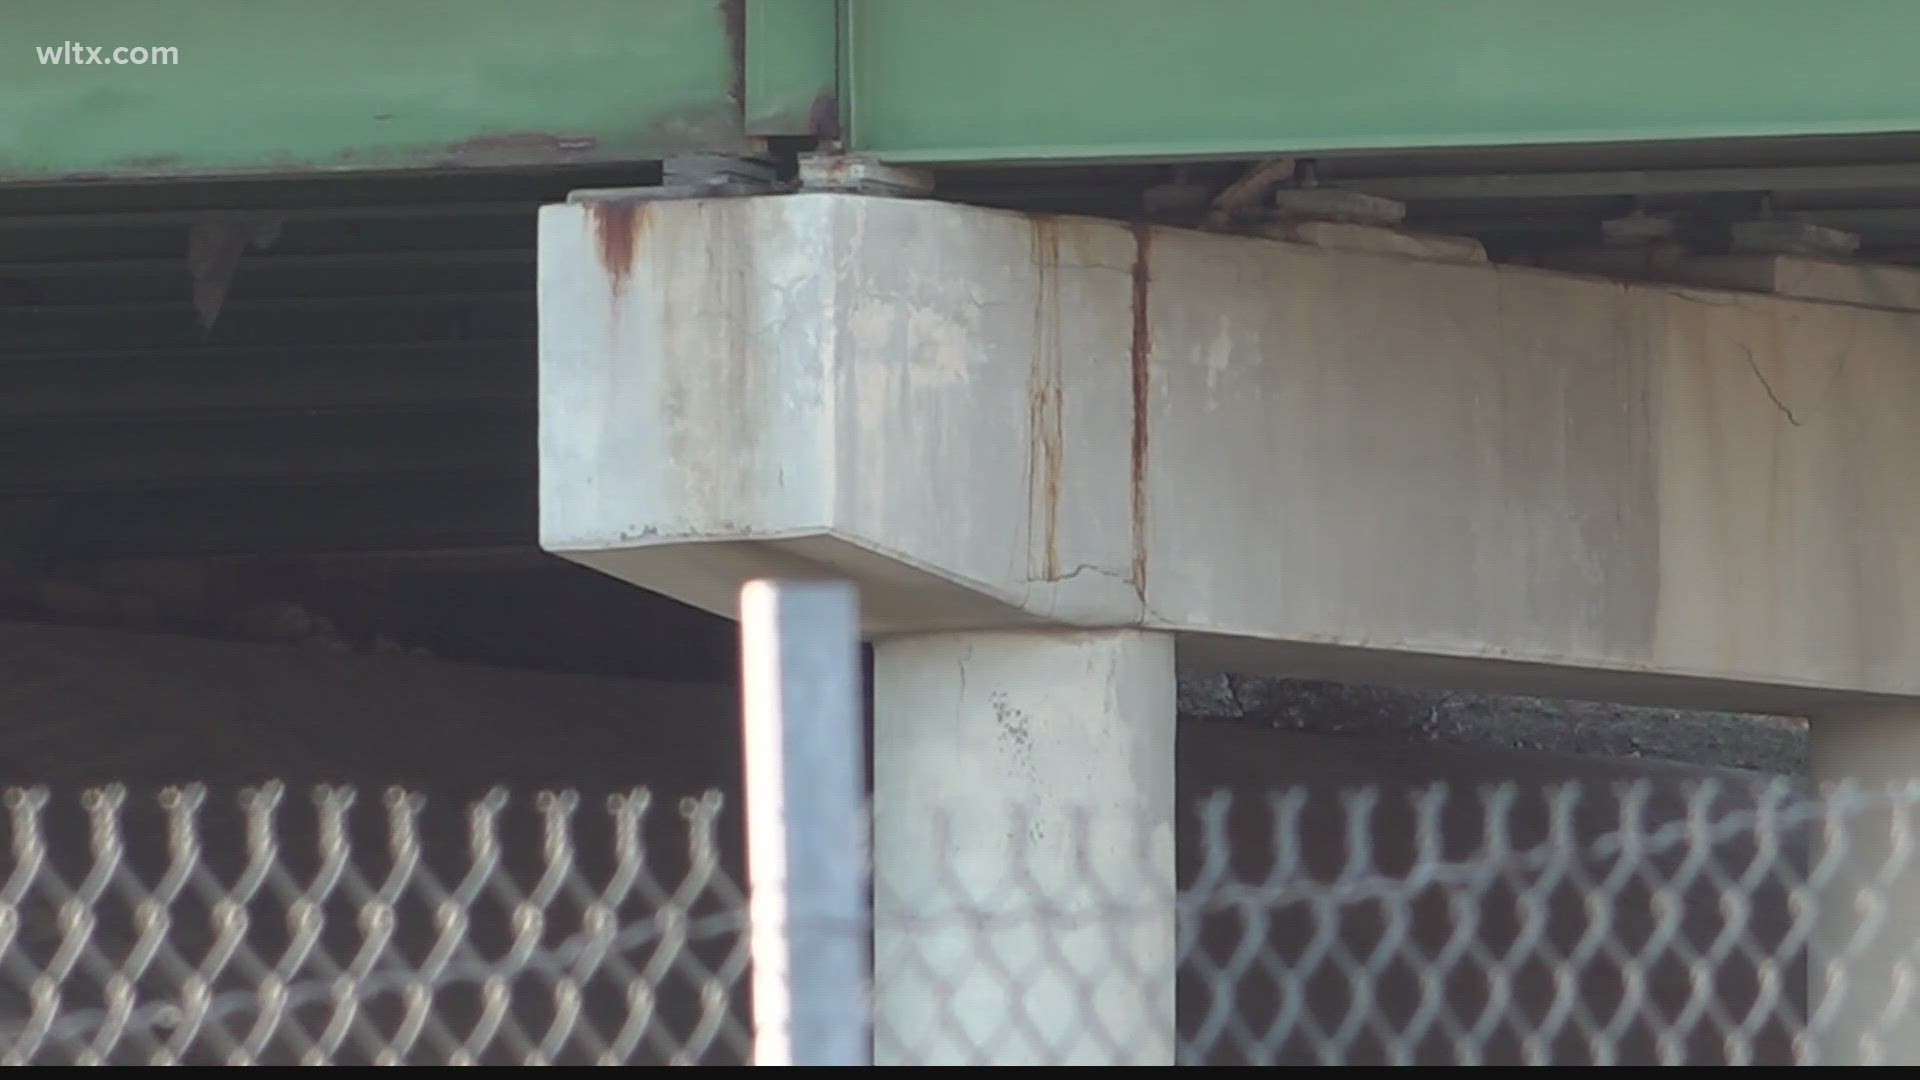 We're on your side after a News19 viewer reached out over concerns of visible cracks in a support beam of the Harbison Boulevard Bridge. Here's what SCDOT says.